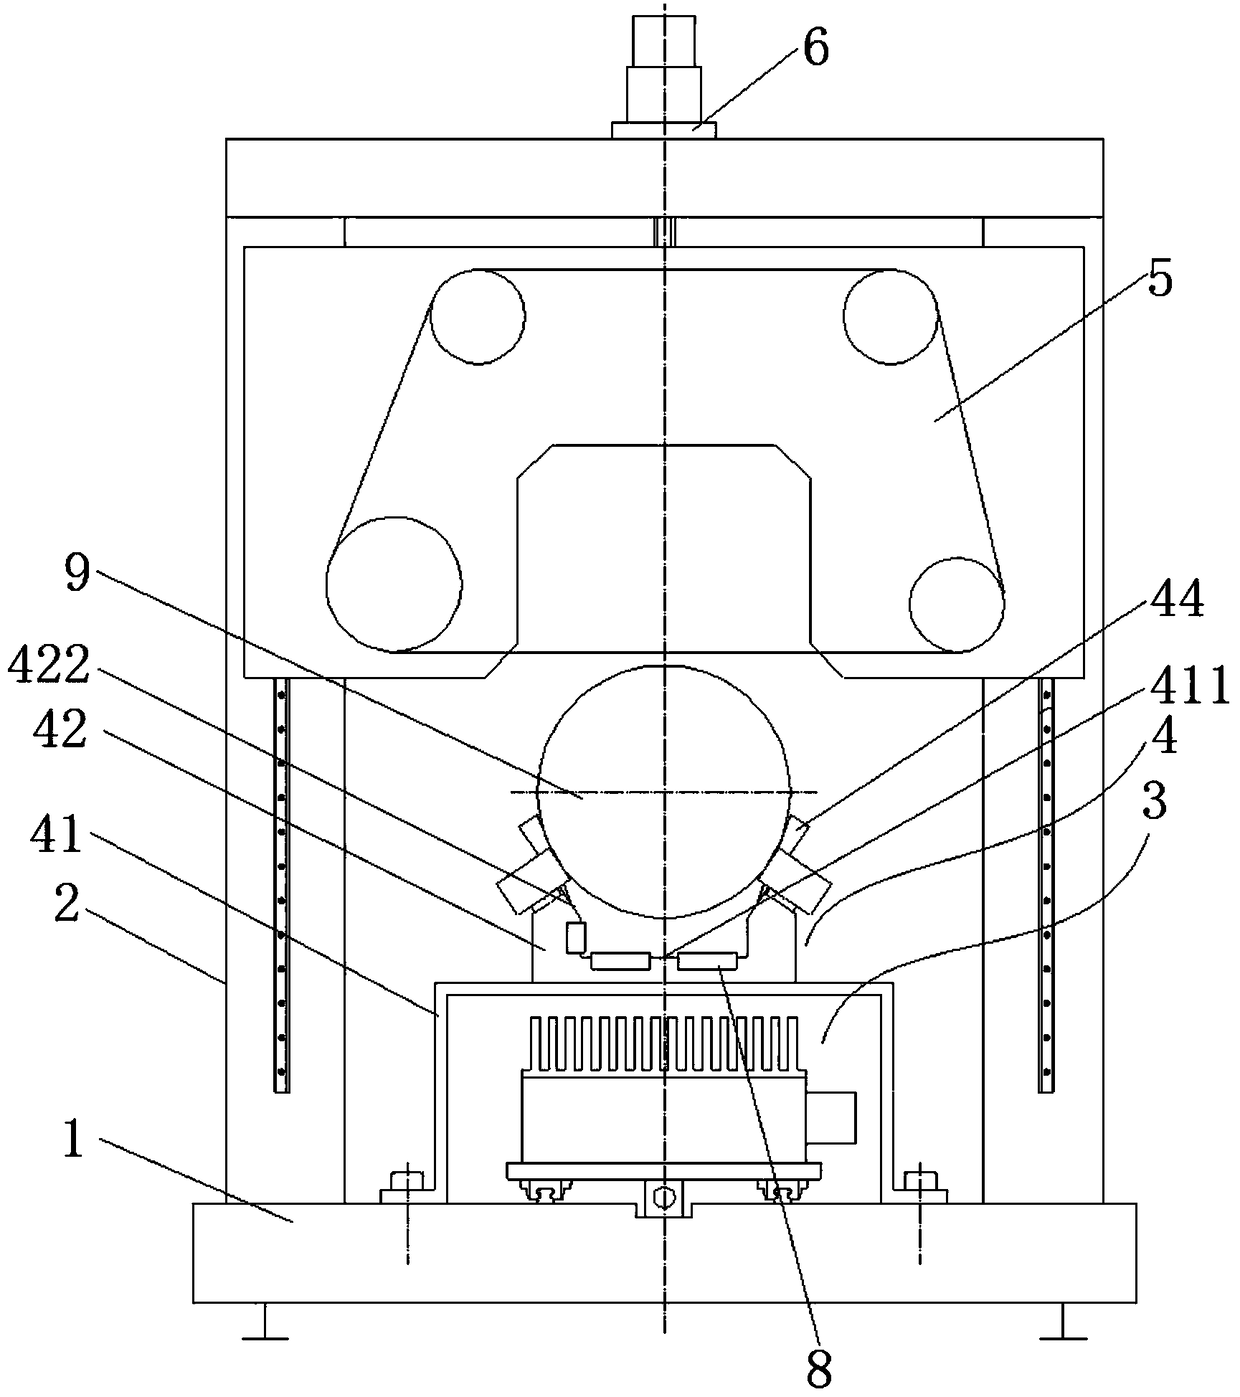 Silicon wafer processing device